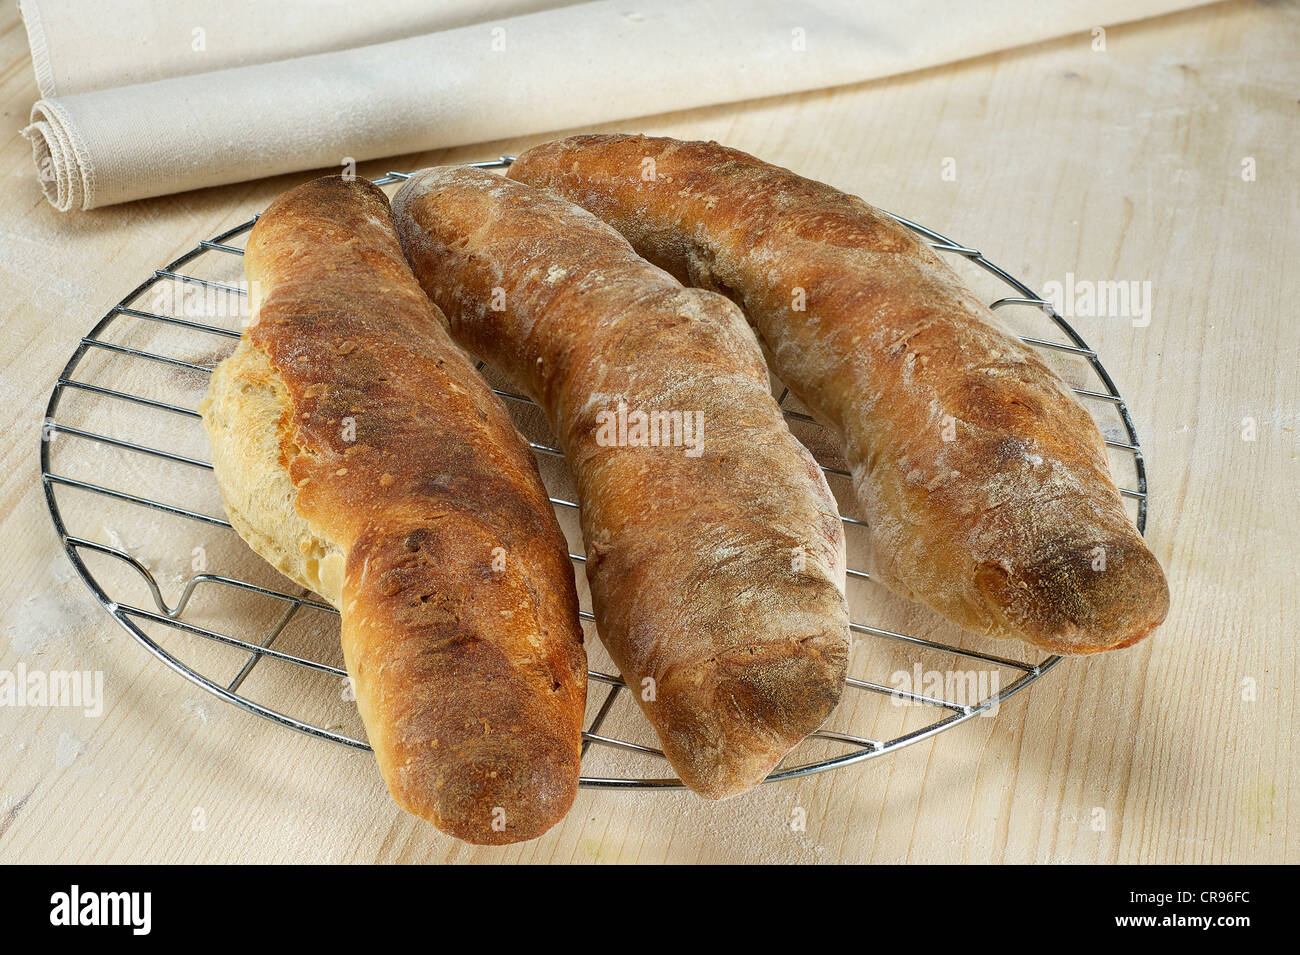 Home-baked baguettes Stock Photo